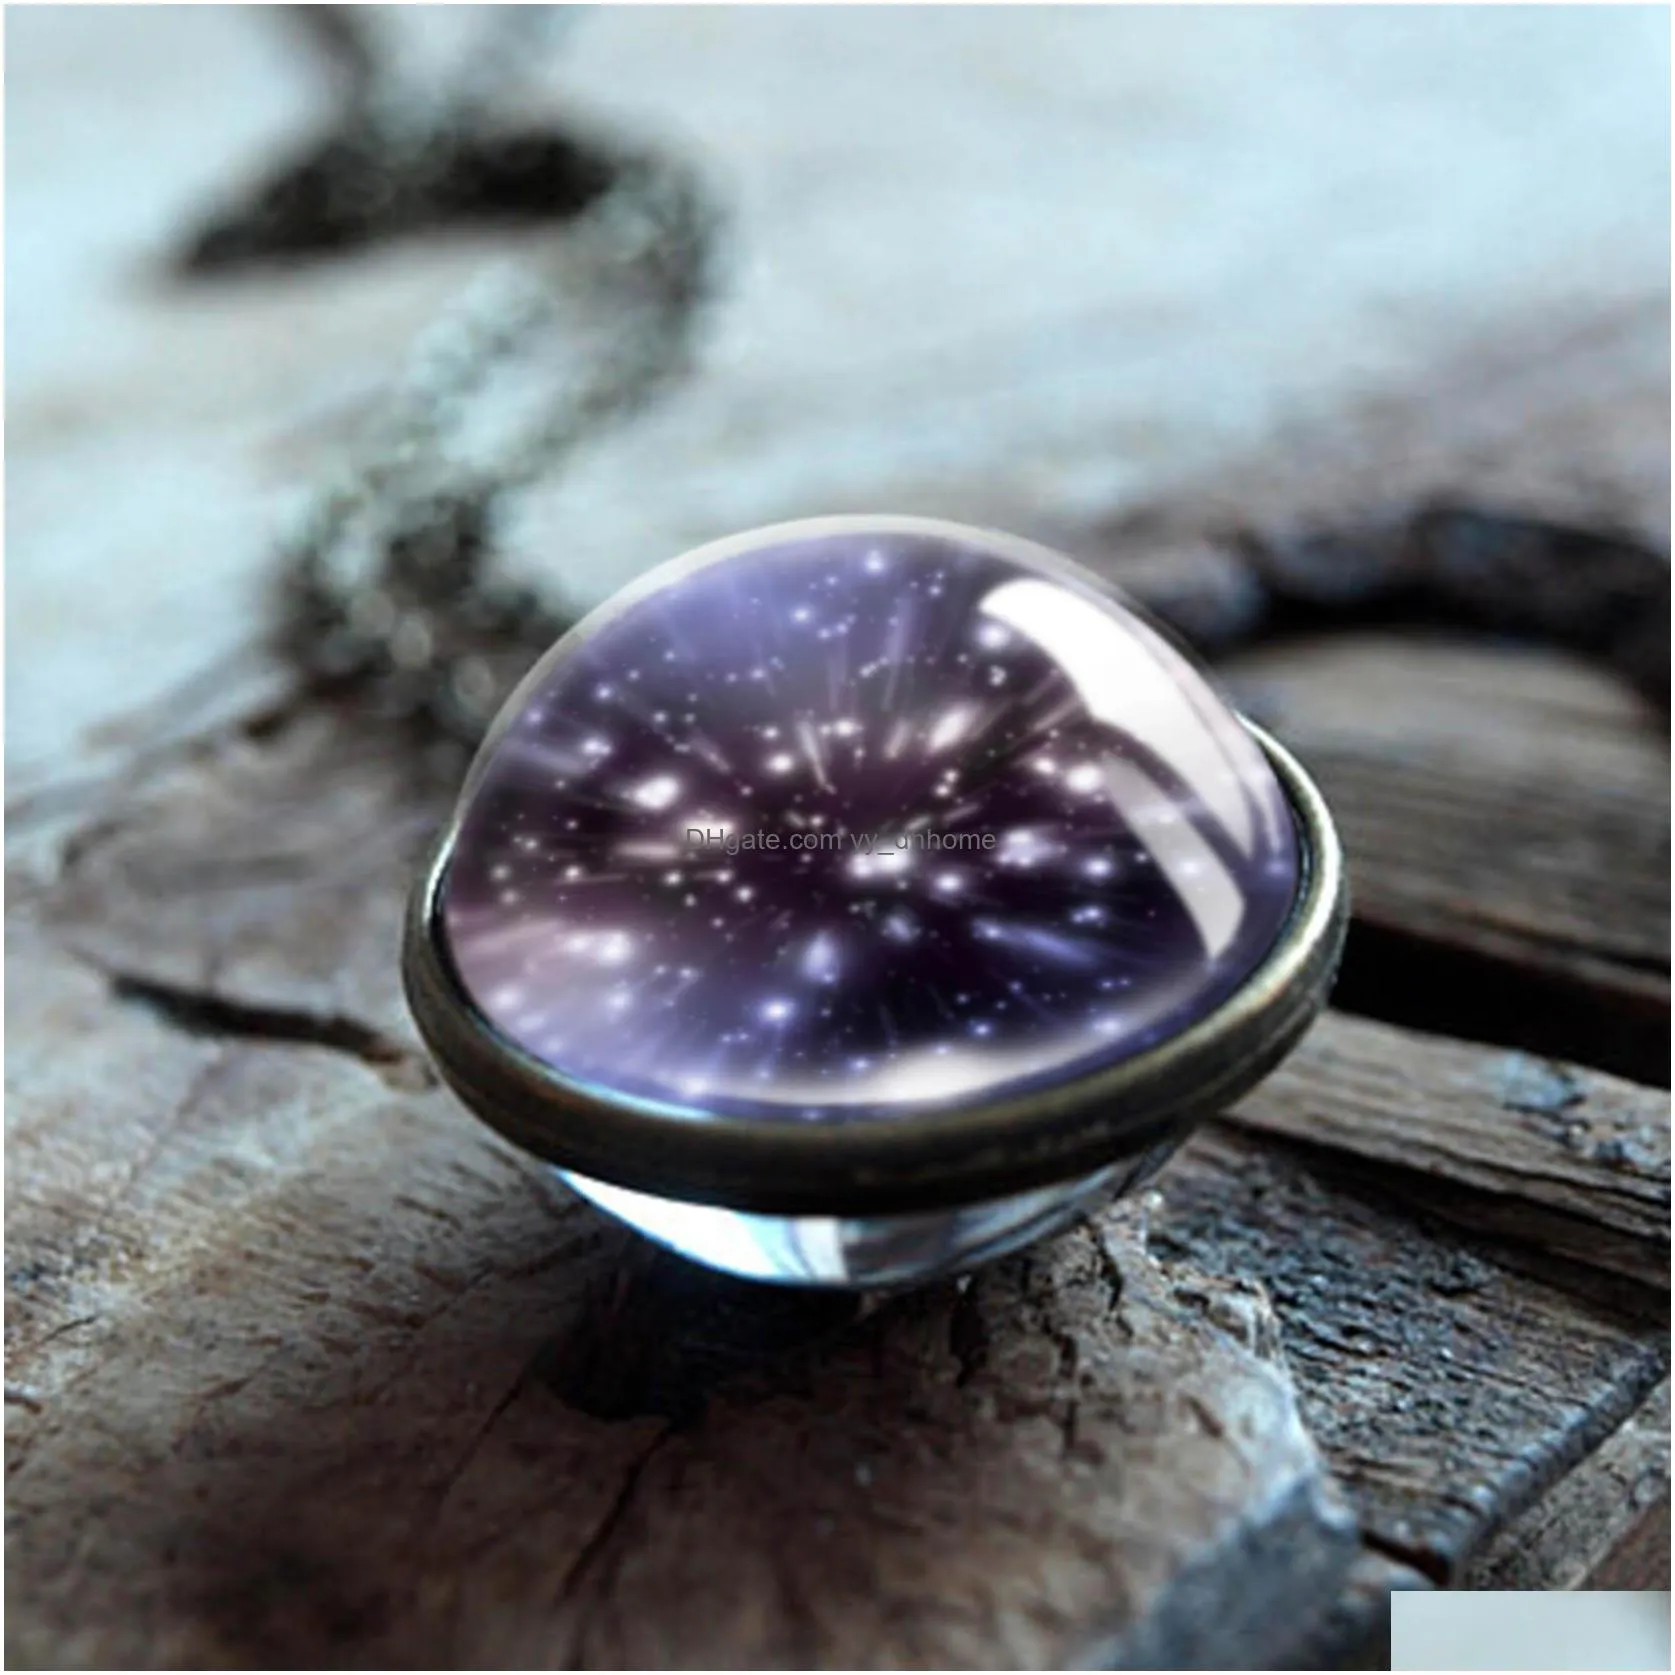 9colors solar system planet galaxy double side glass pattern pendant necklace chain man women charm jewelry